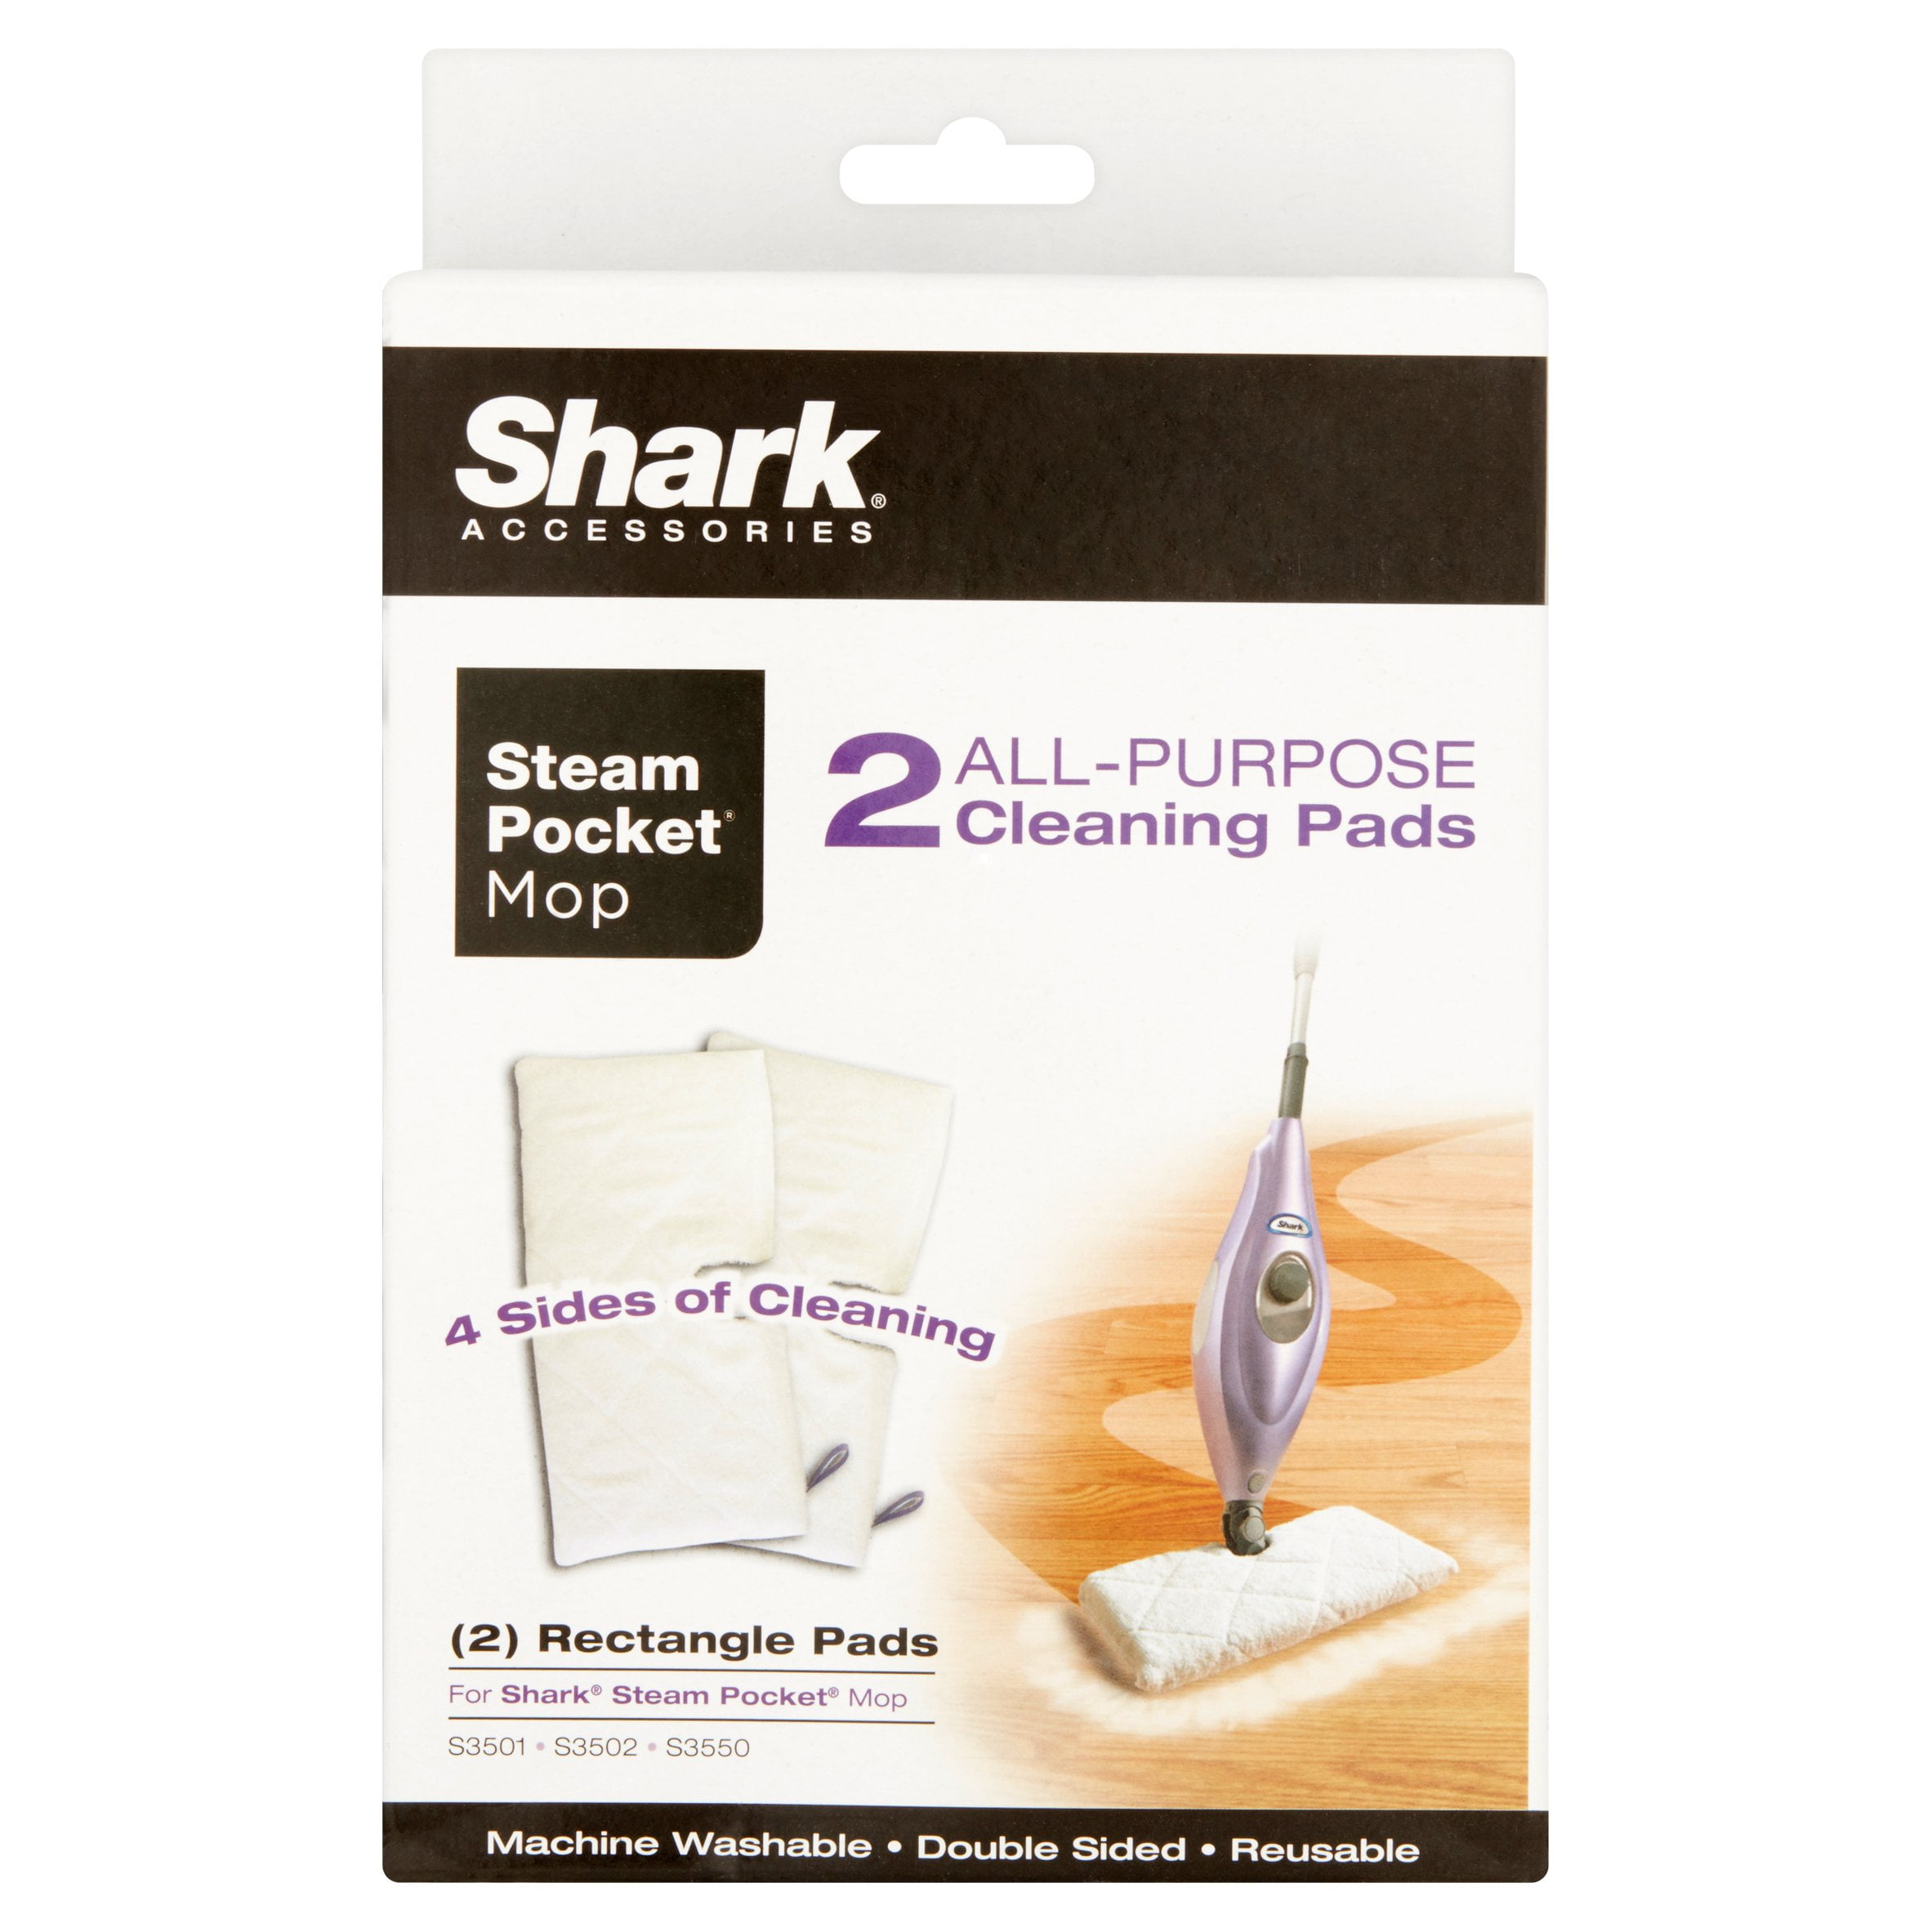 2 Shark Steam Pocket Mop All-Purpose Cleaning Pads 1 Rectangle & 1 Triangle 